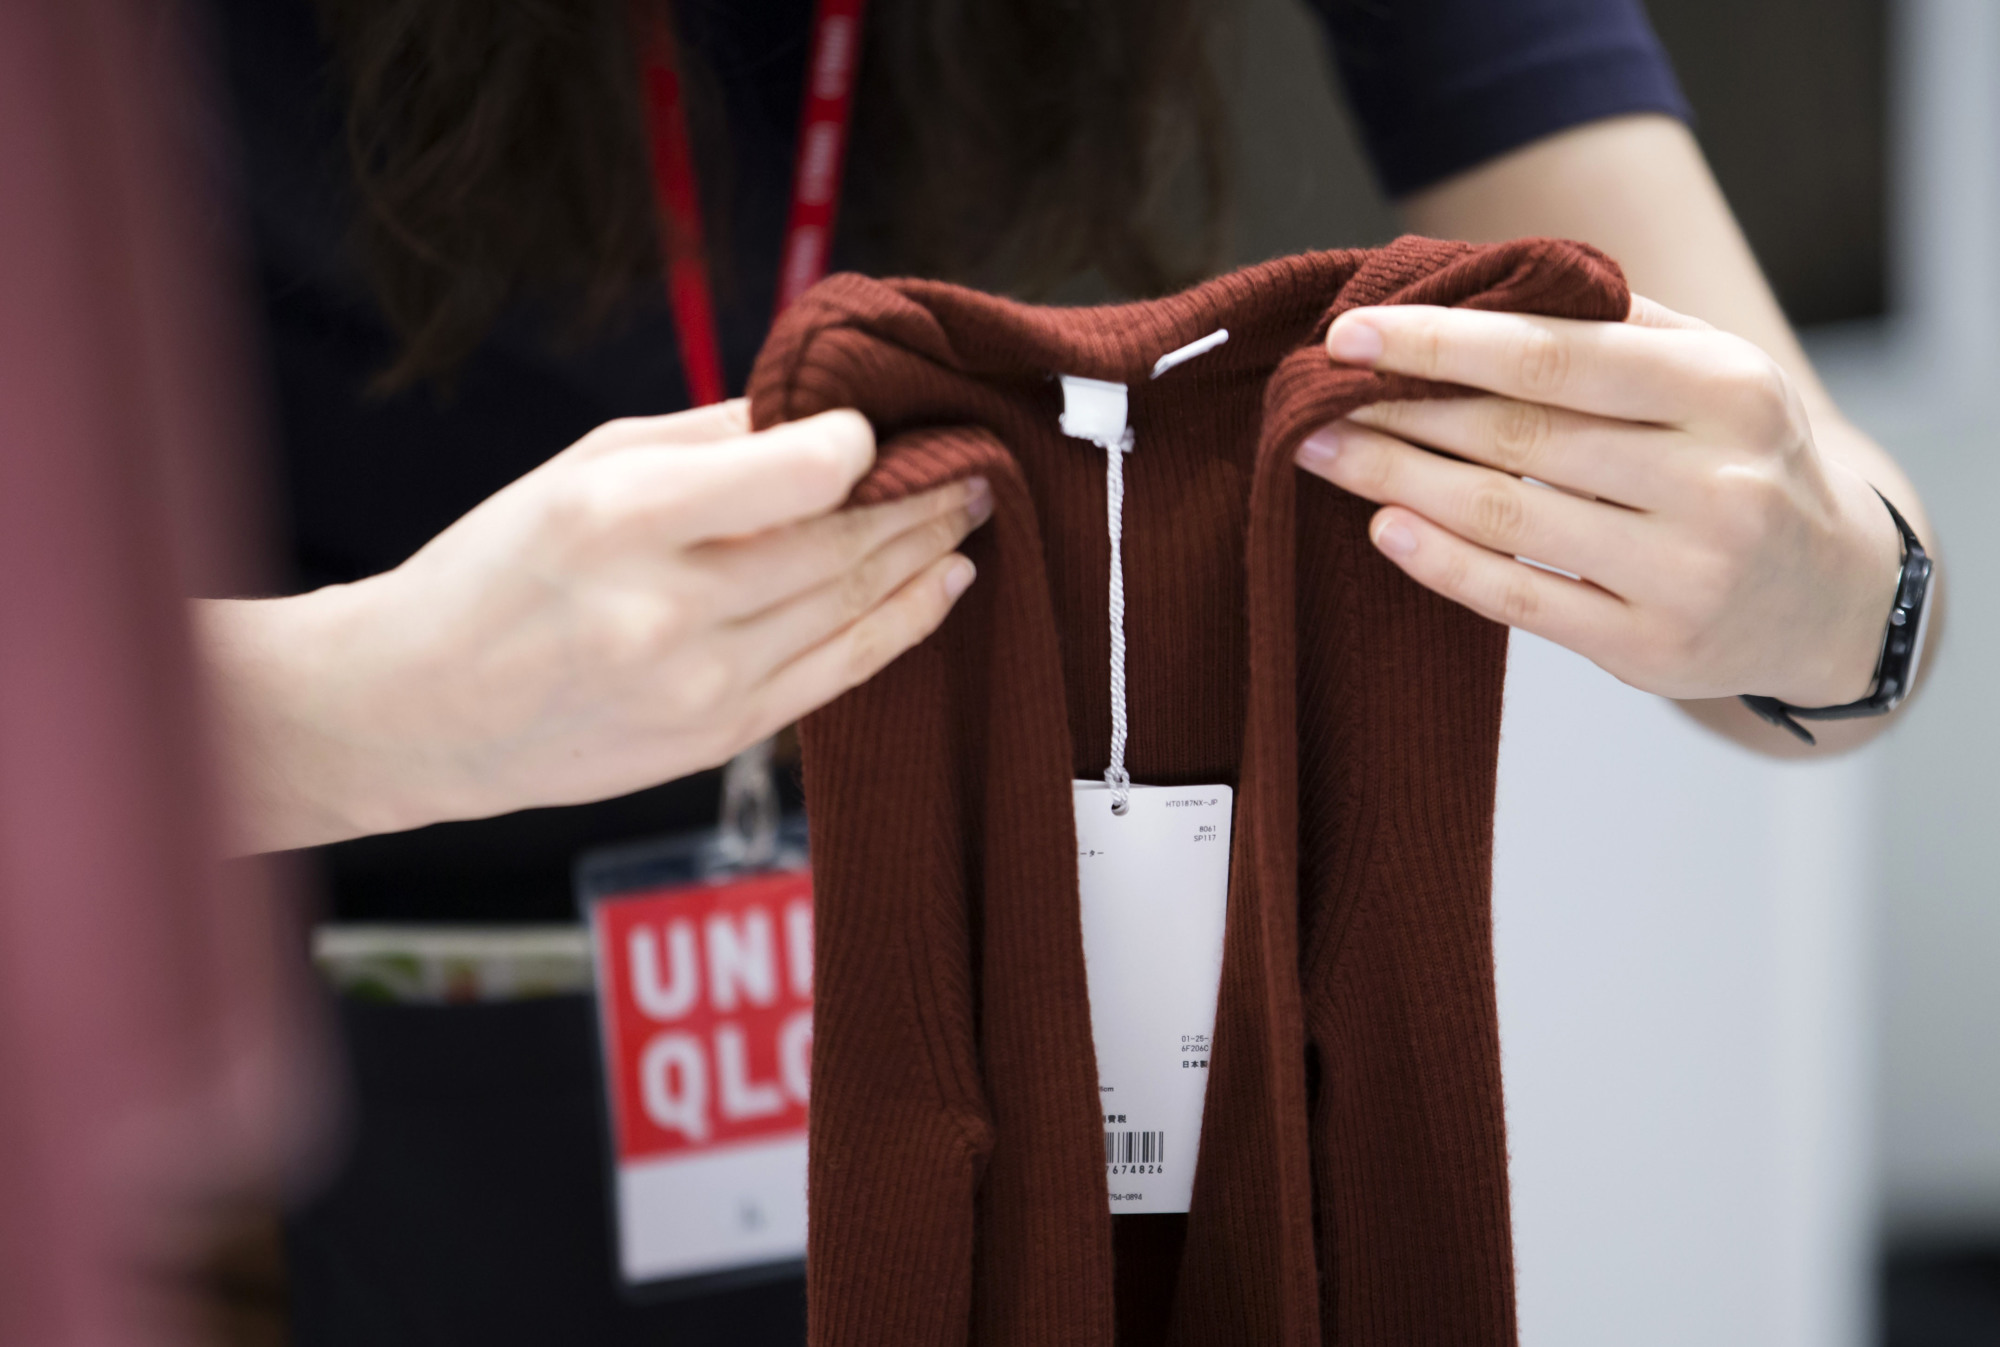 Exploited workers?: An employee folds clothing in a Uniqlo store. | TOMOHIRO OHSUMI / BLOOMBERG